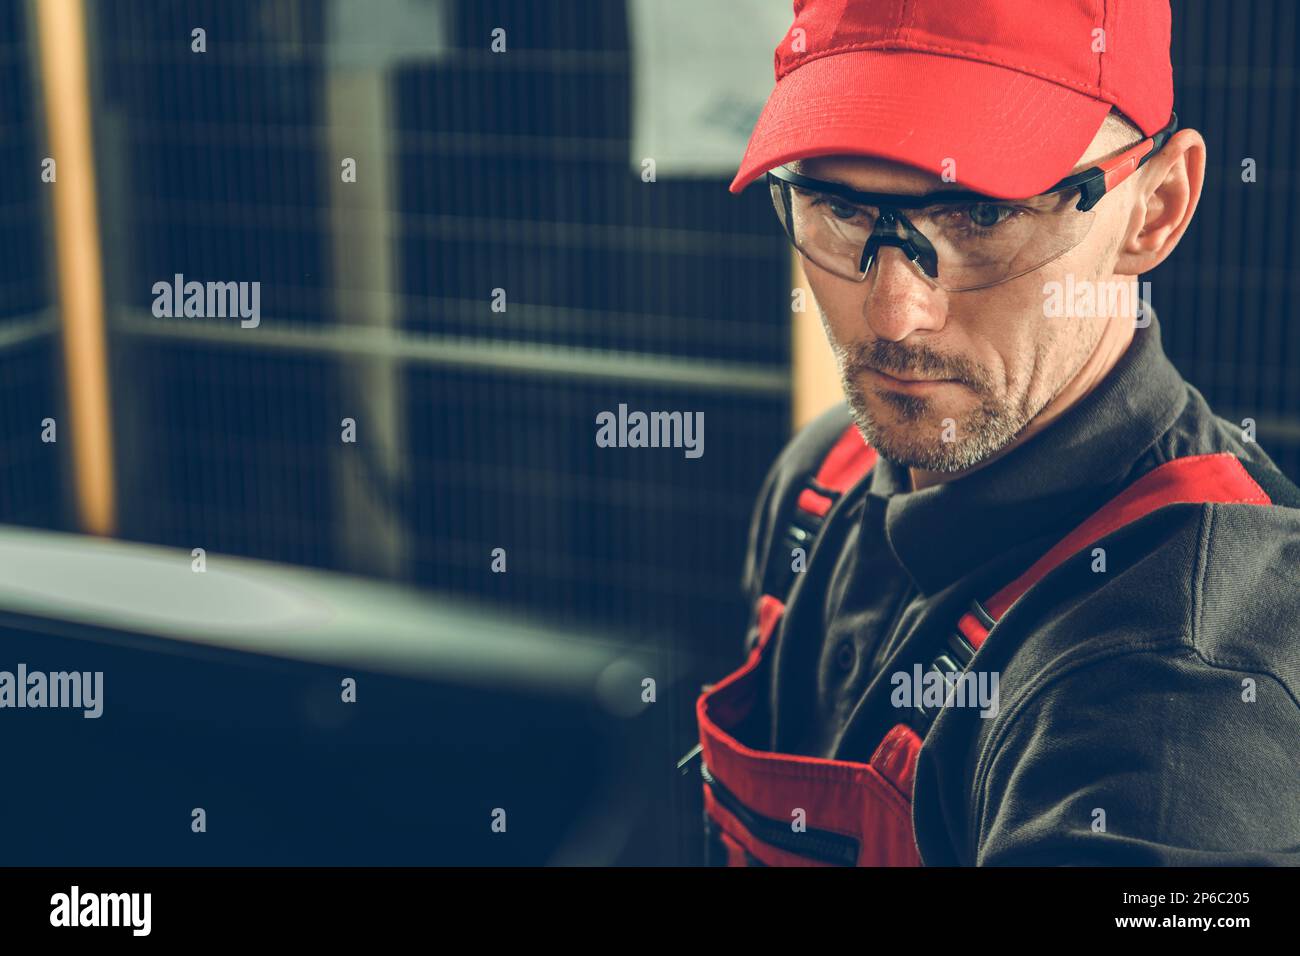 Caucasian Factory Production Line Operator in His 40s Portrait. Wearing Eyes Protection Glasses and a Hat. Stock Photo